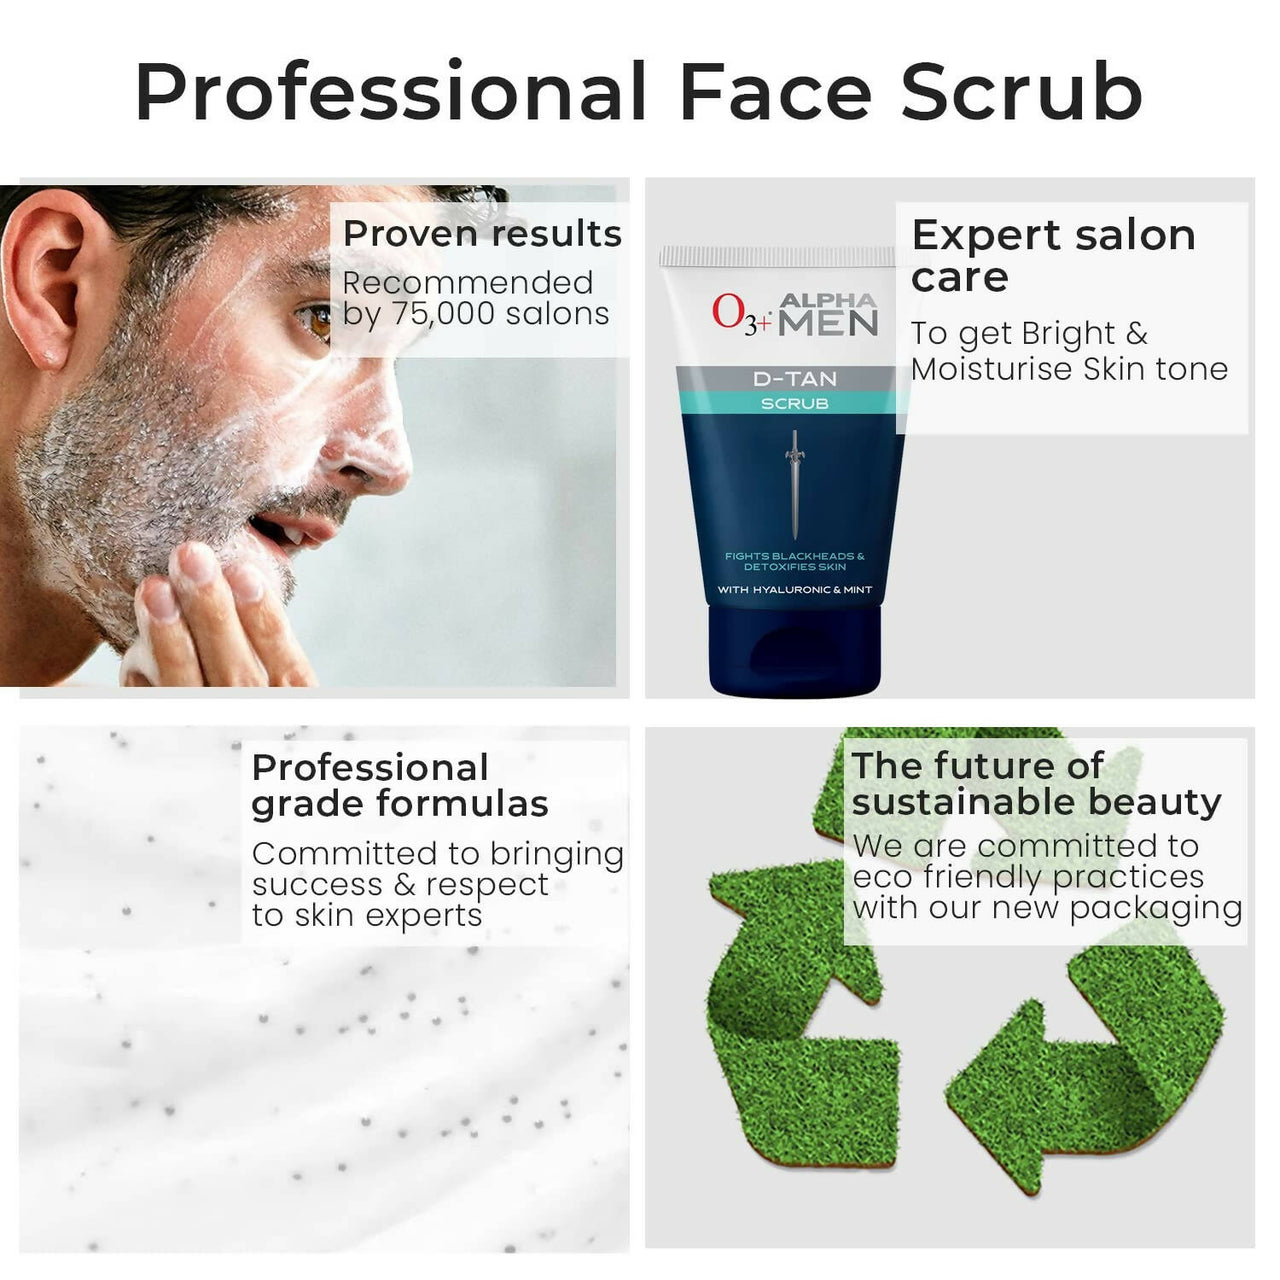 Professional O3+ Acno D-TAN Scrub With Hyaluronic & Mint - Distacart